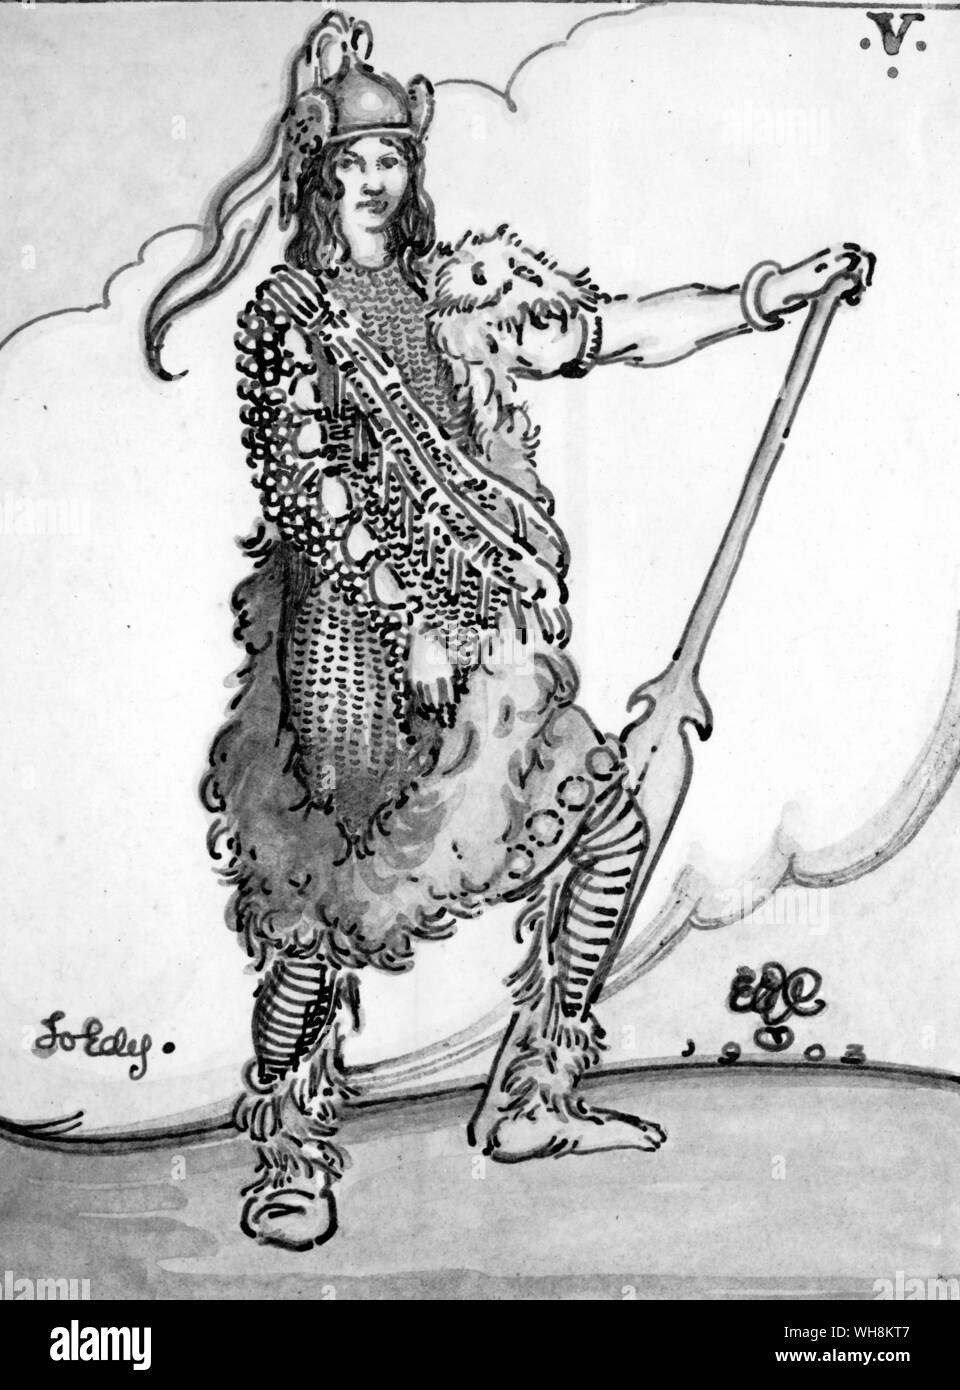 A Viking Costume design by Gordon Caig for Ibsen's The Vikings Imperial Theatre 1903 Stock Photo